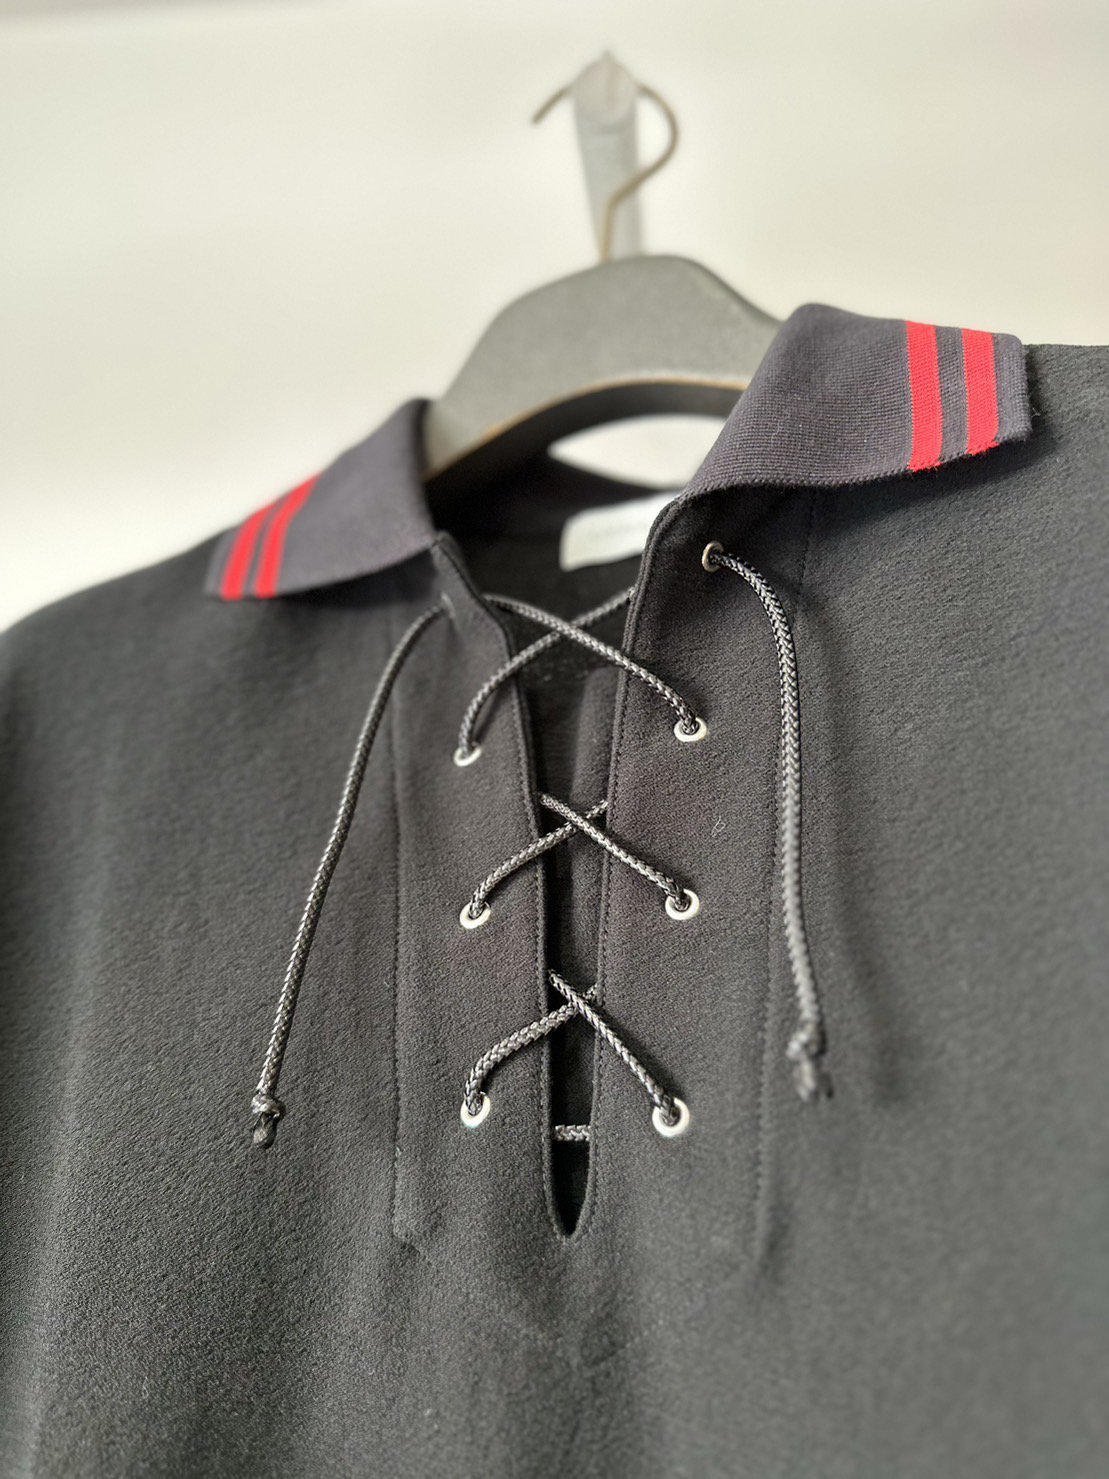 LITTLEBIG<br />S/S Lace-Up Polo SH / Black<img class='new_mark_img2' src='https://img.shop-pro.jp/img/new/icons14.gif' style='border:none;display:inline;margin:0px;padding:0px;width:auto;' />